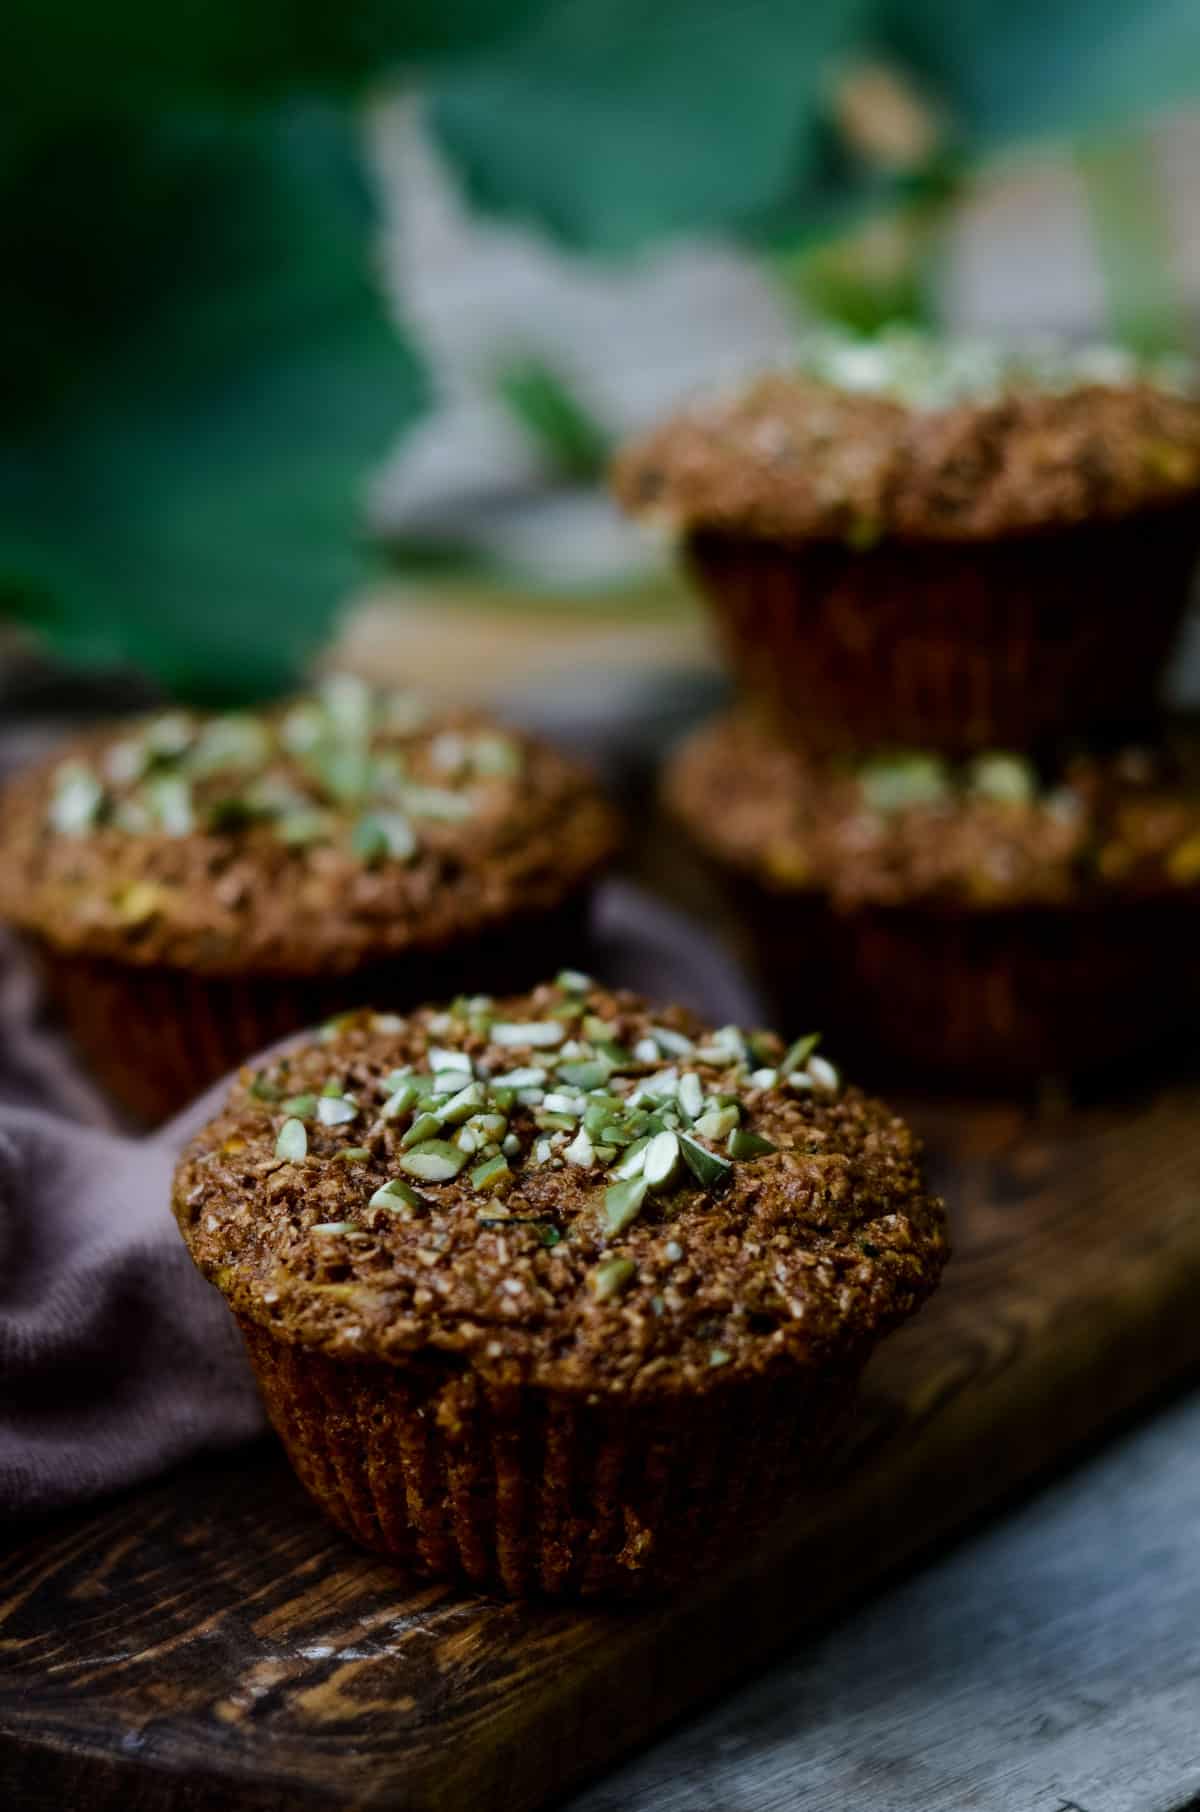 Brown bran zucchini muffins with chopped green pumpkin seeds on top, on a wooden serving platter.